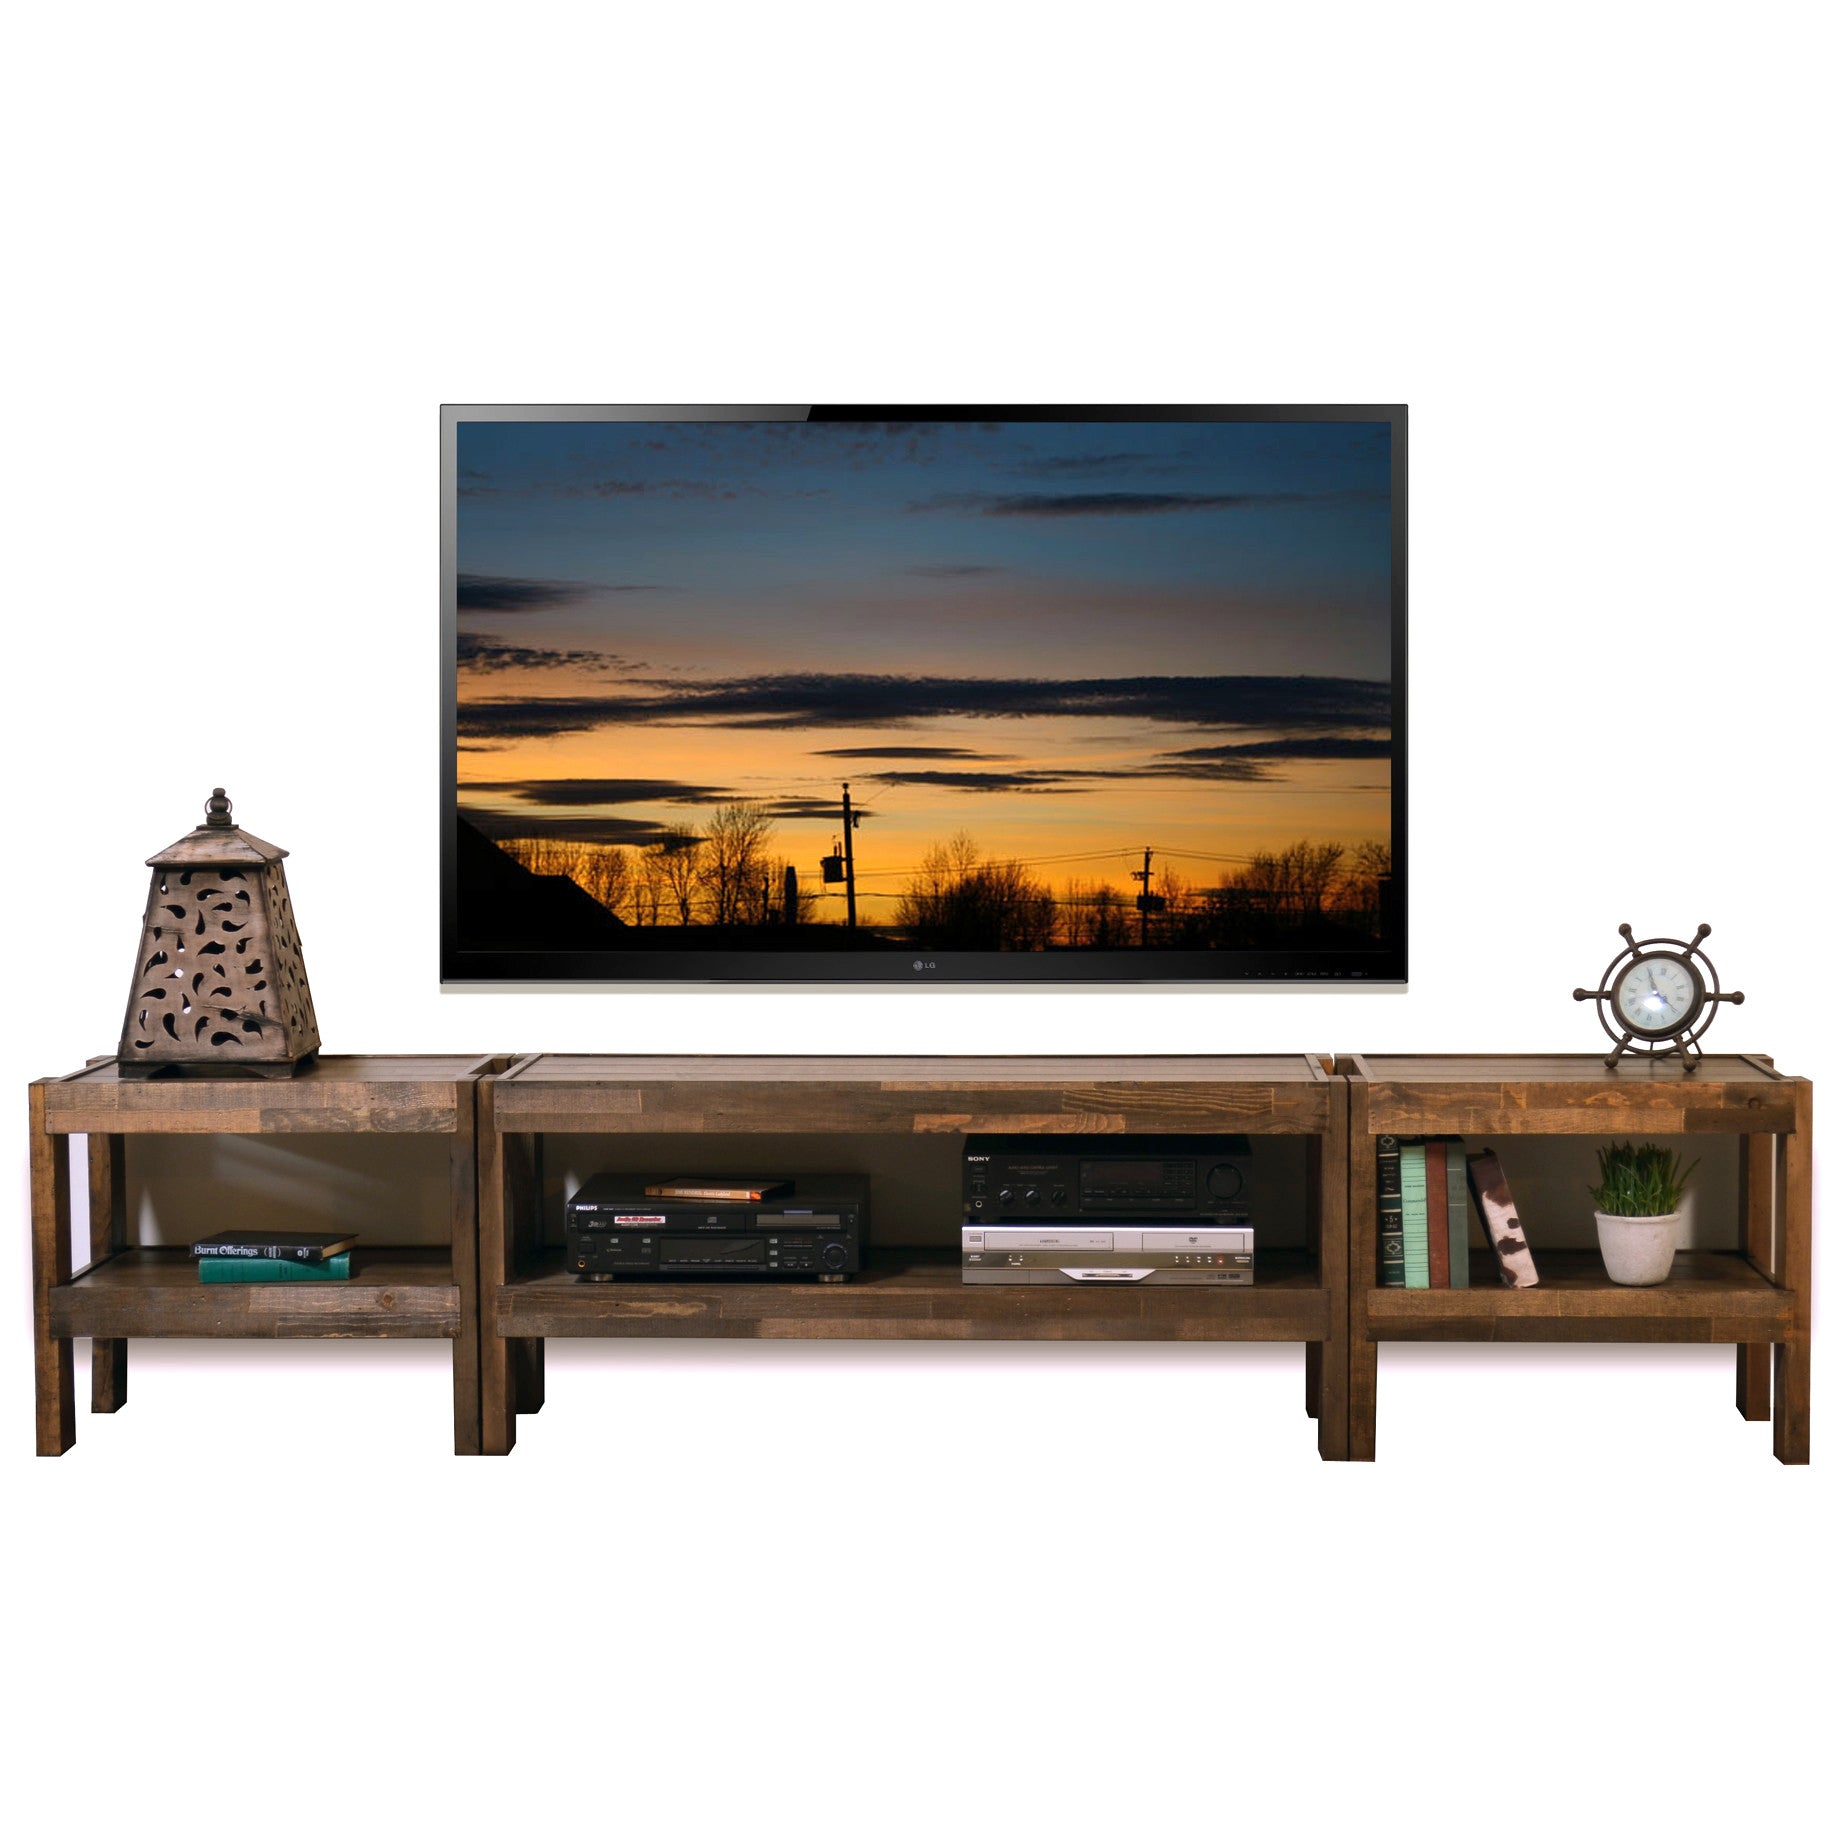 Rustic Reclaimed TV Stand Entertainment Center - presEARTH Spice